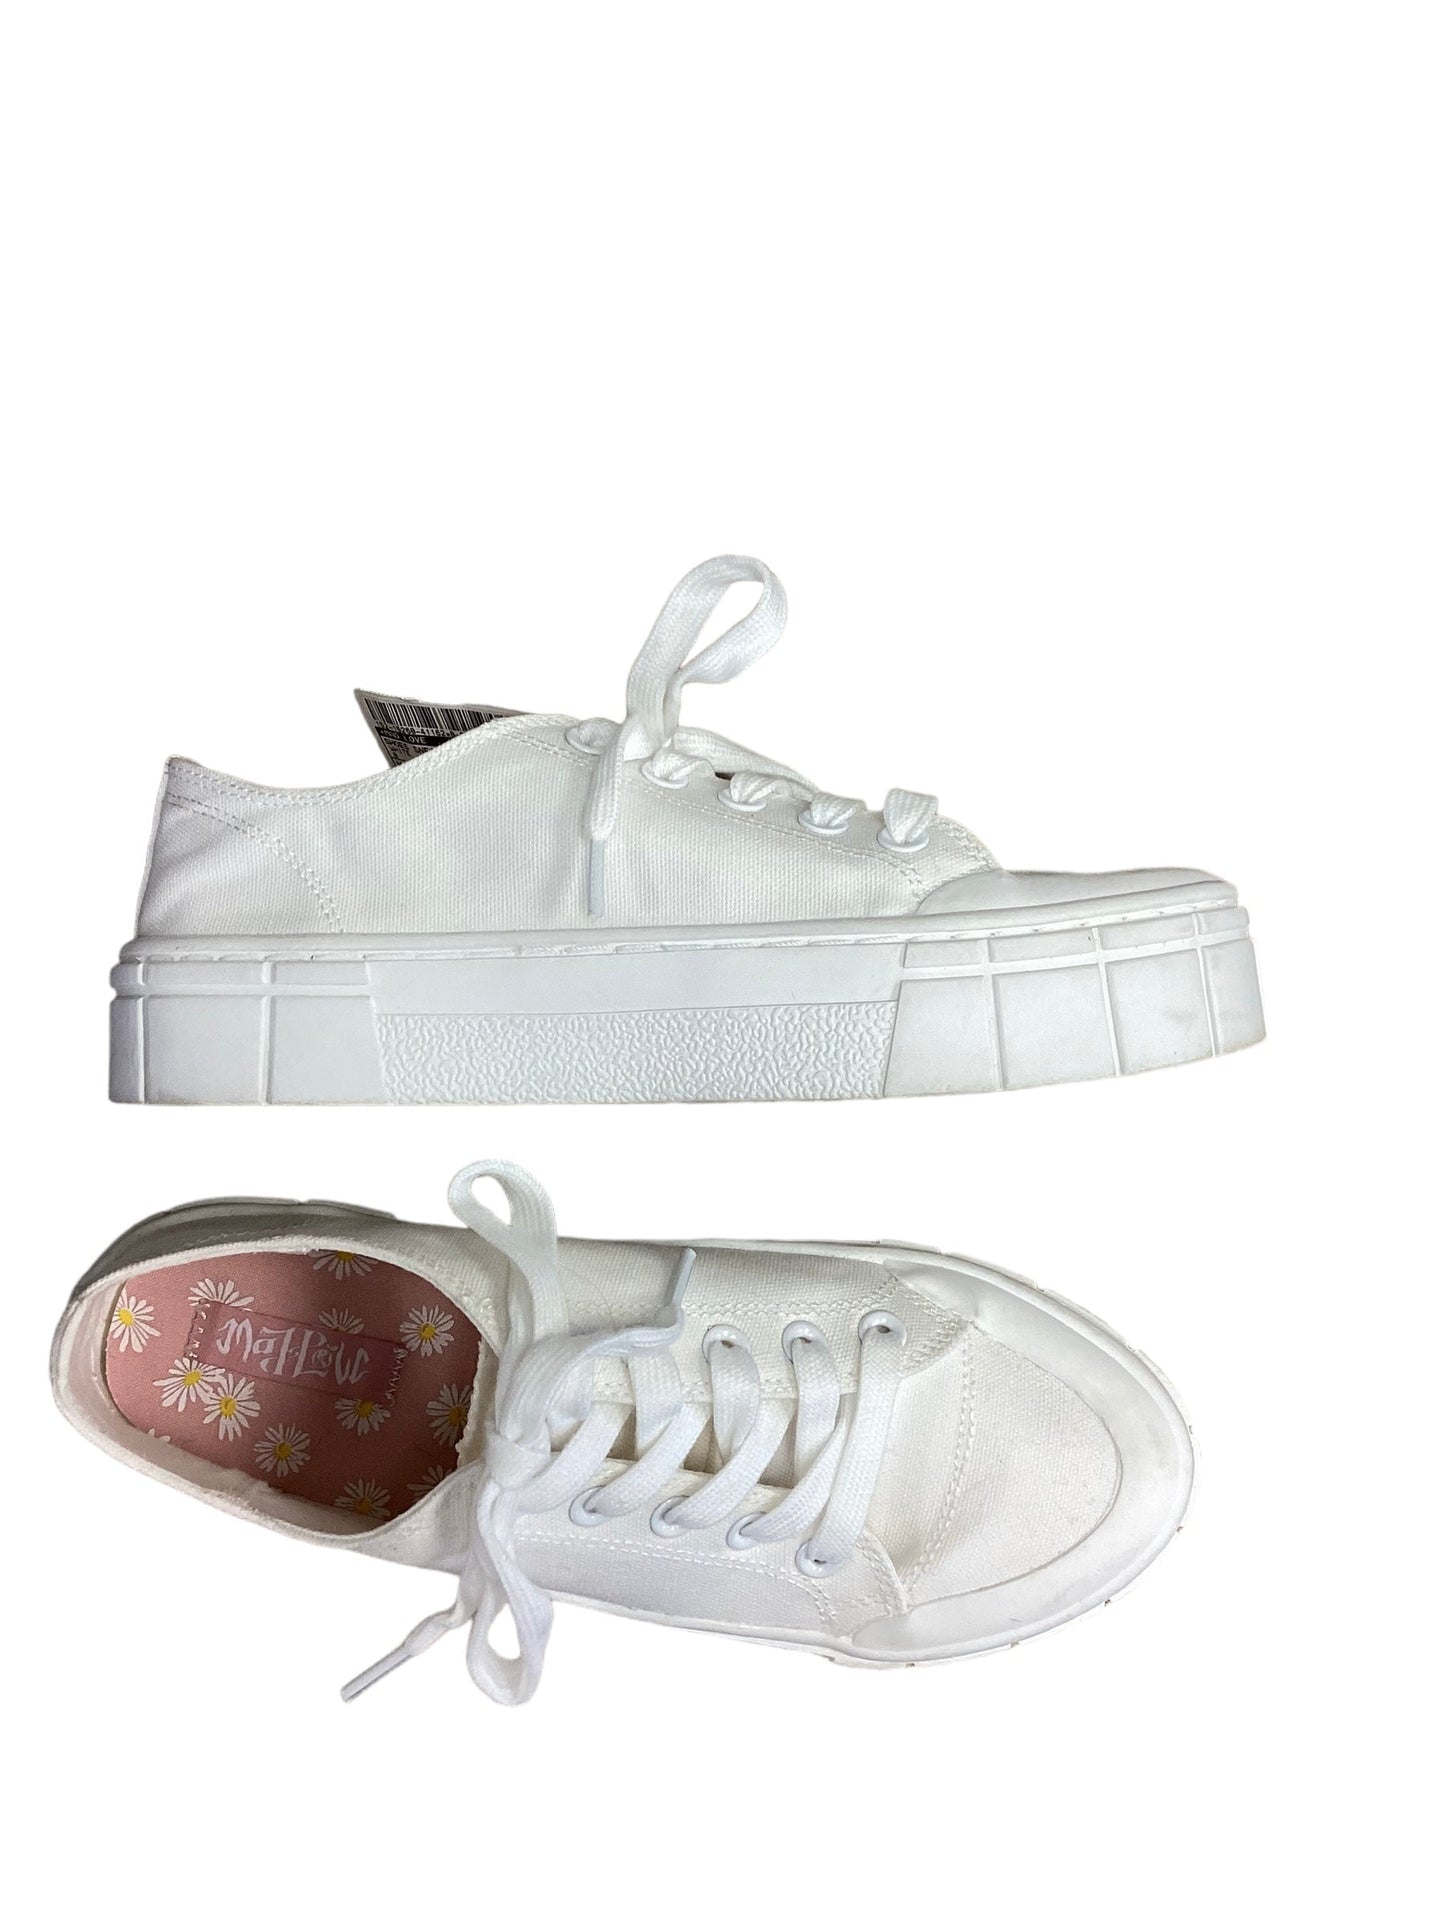 White Shoes Sneakers Mad Love, Size 8